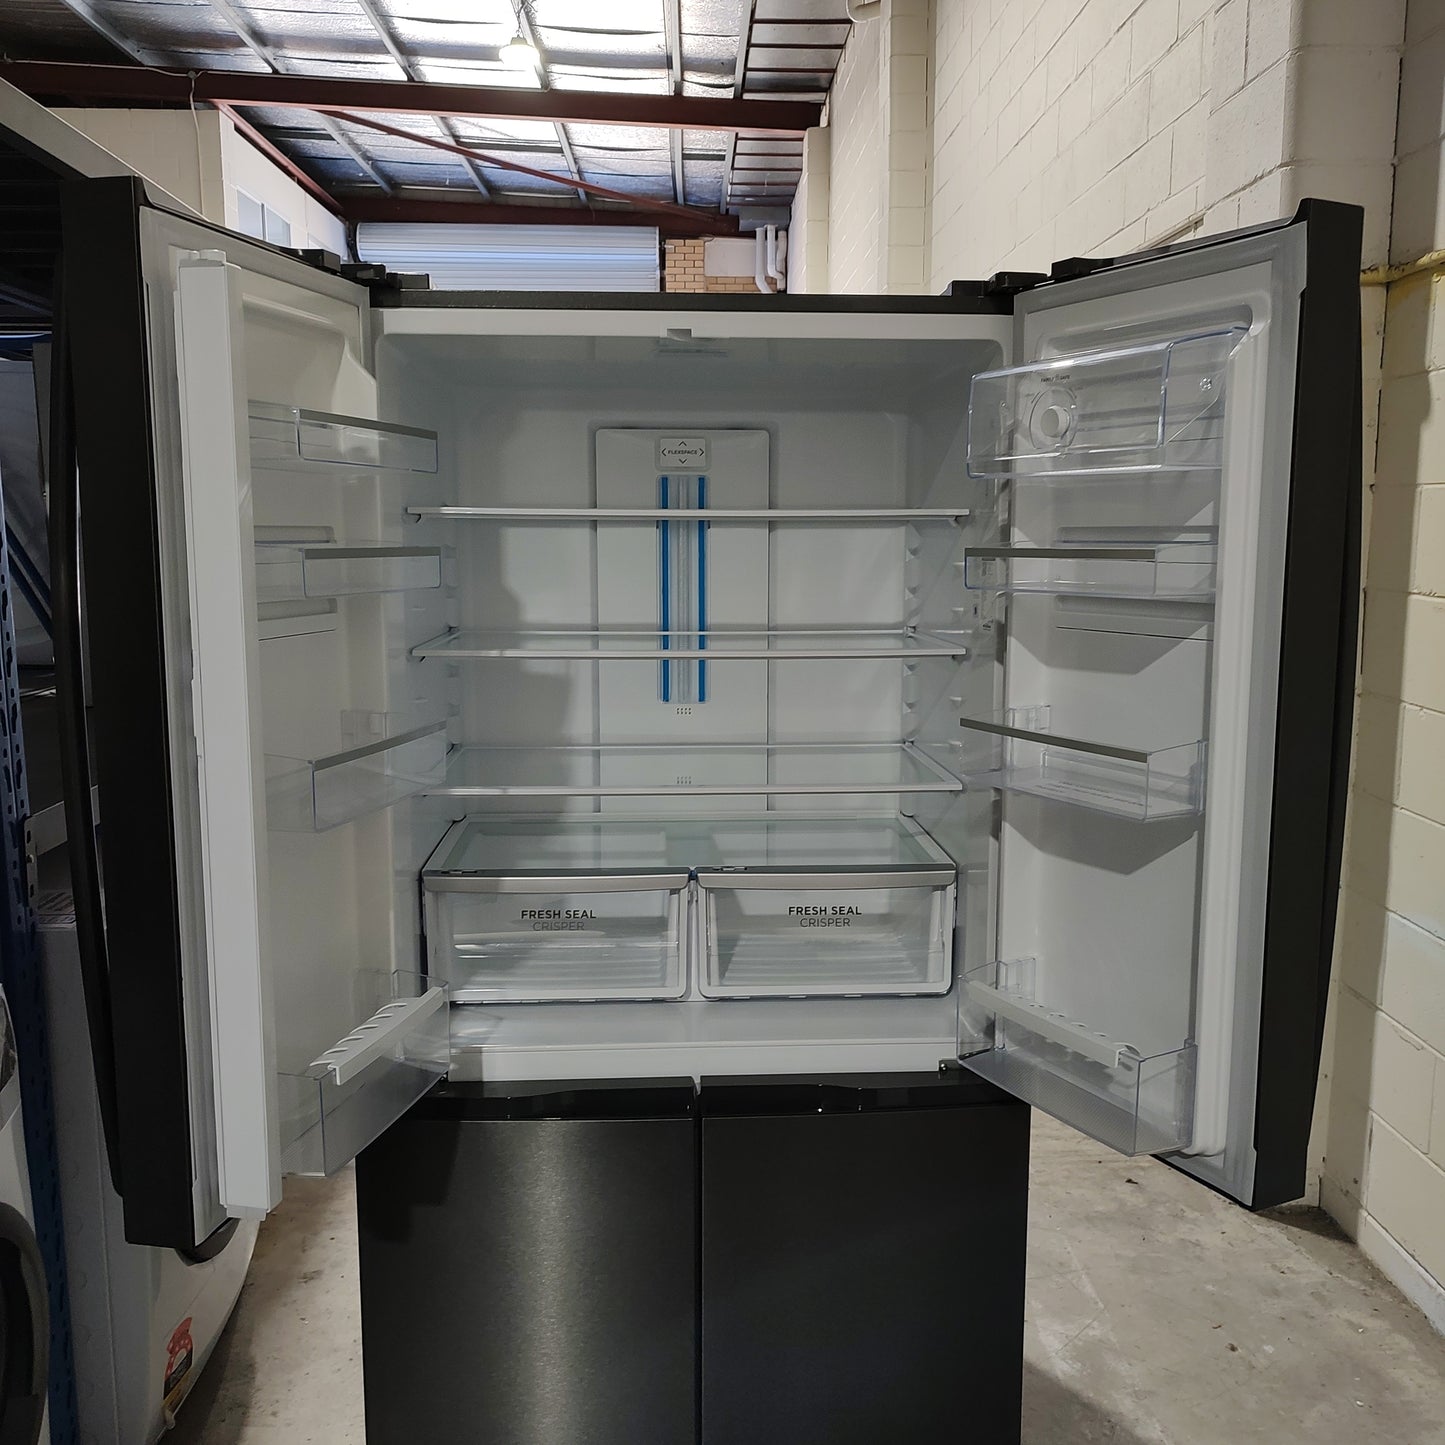 Westinghouse 541L Dark Stainless Steel French Door Frost Free Fridge WQE6000BB